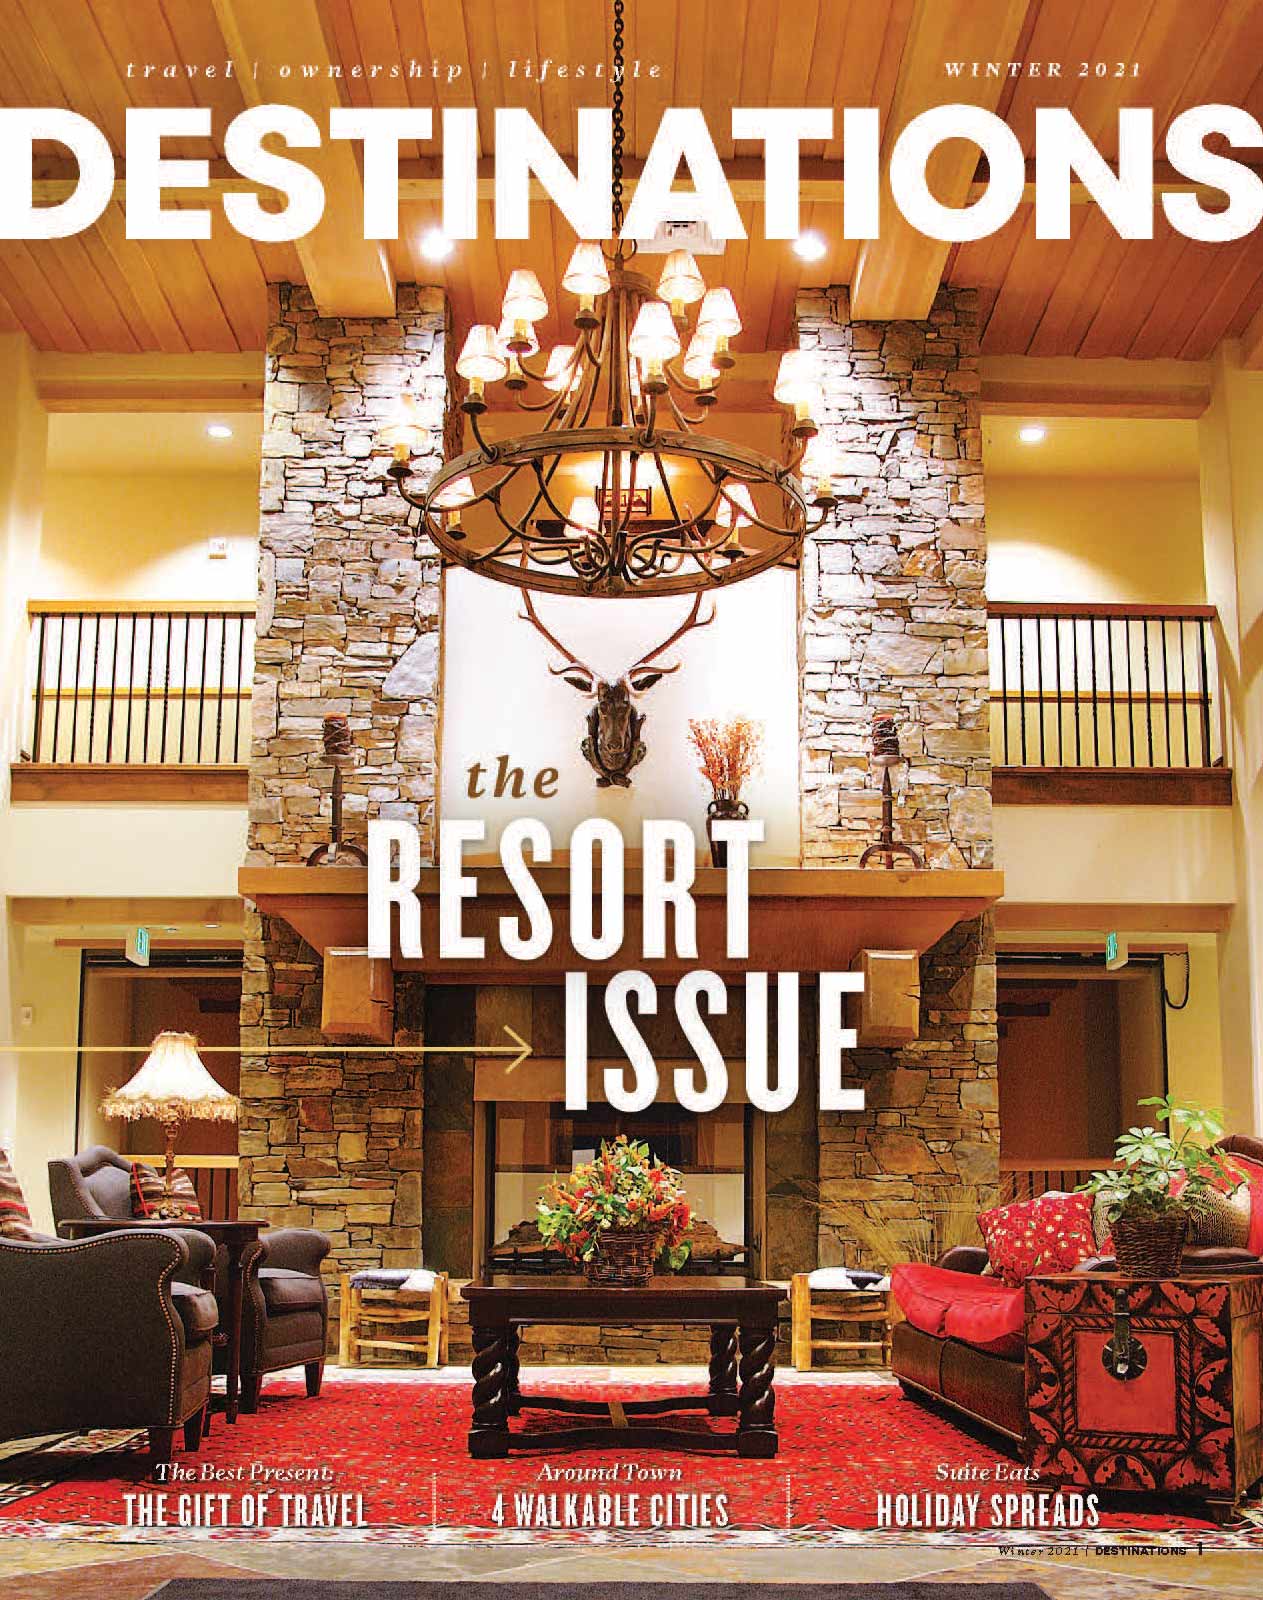 The cover of the Winter 2021 issue of Destinations Magazine showing the lobby of a rustic timeshare resort.